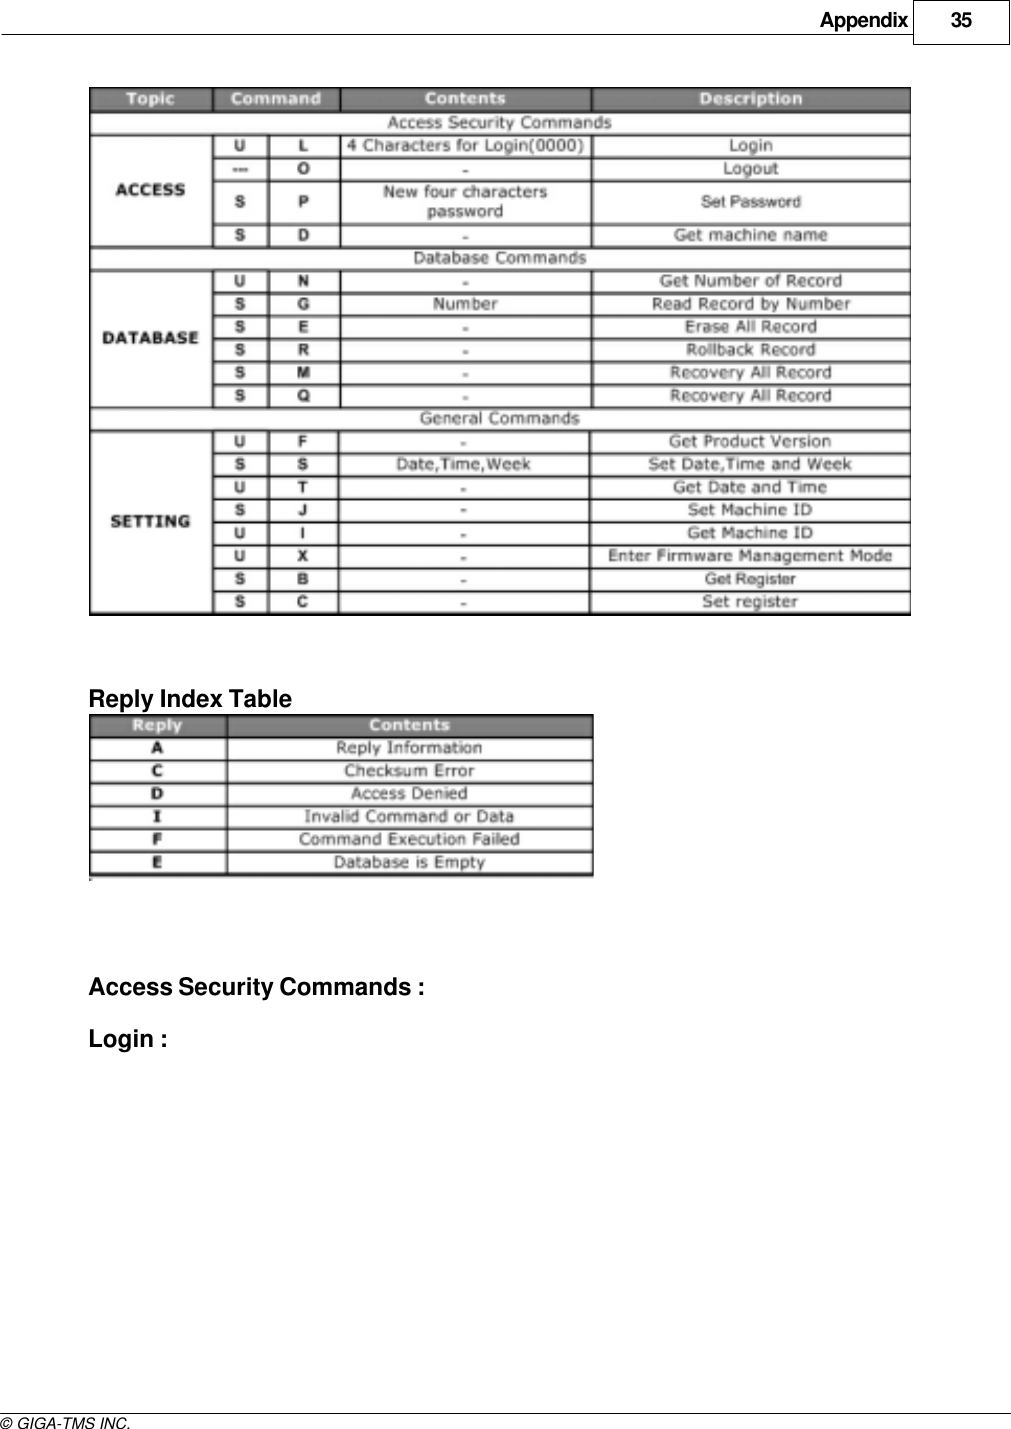 Appendix 35© GIGA-TMS INC.Reply Index TableAccess Security Commands :Login :